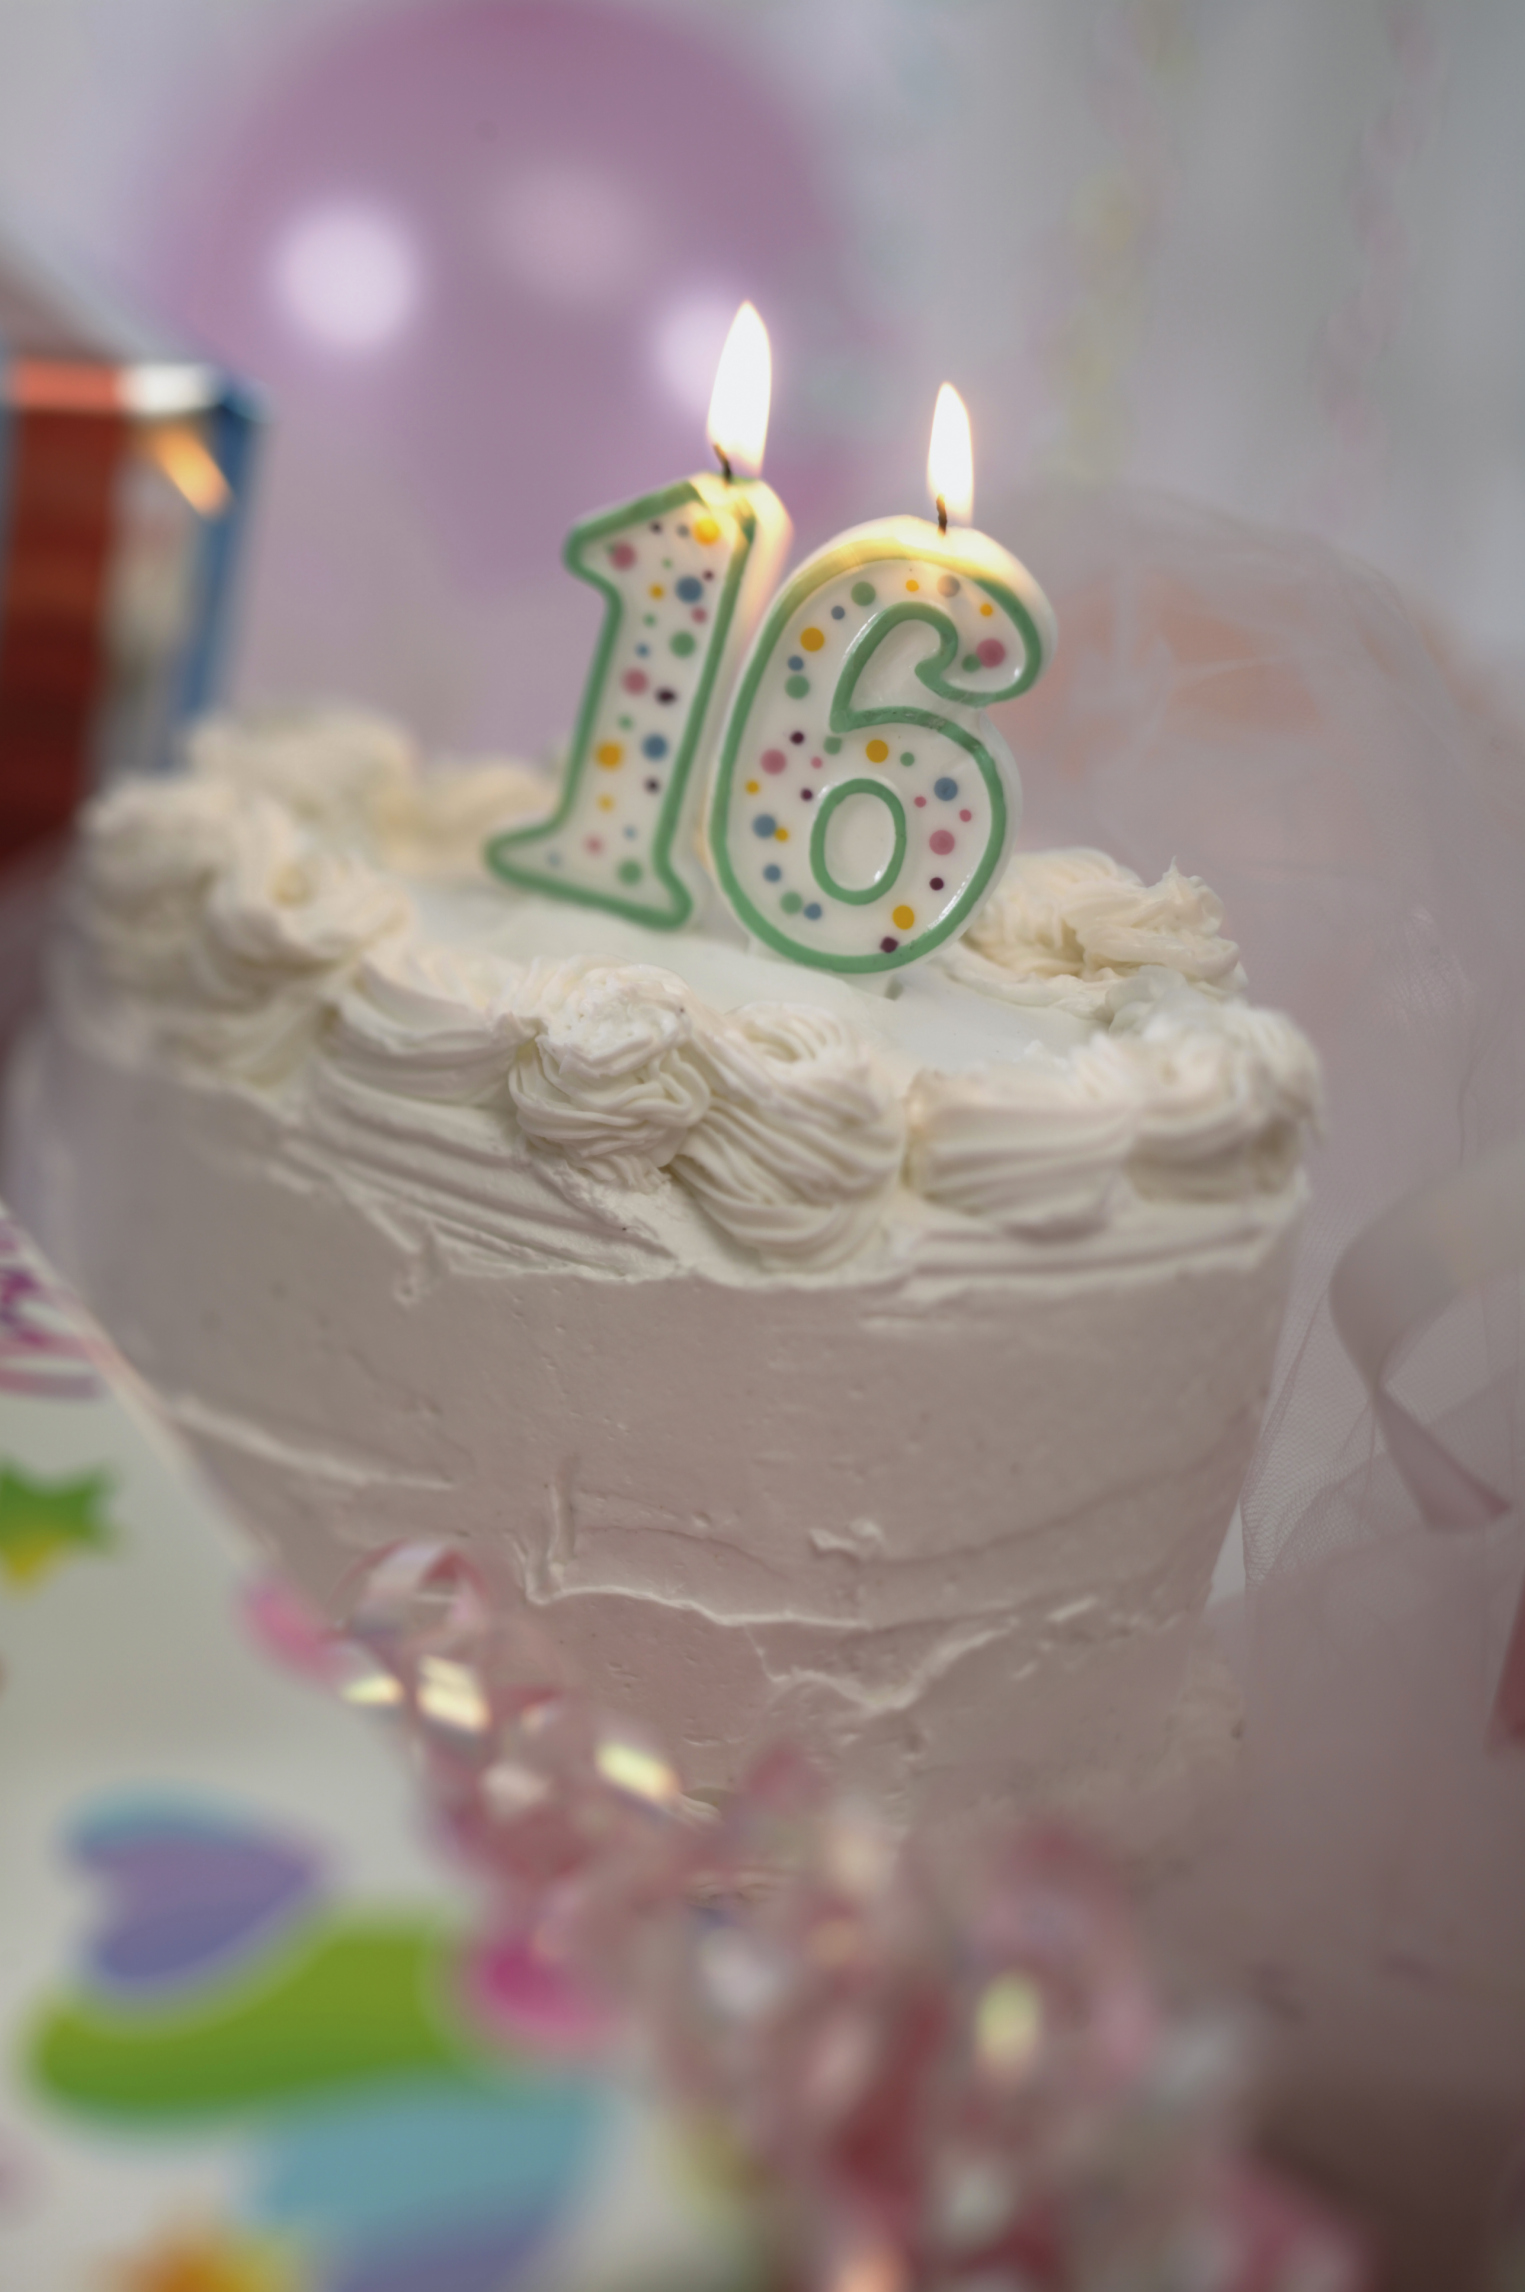 Why Is a Girl's Sweet 16th Birthday Important?